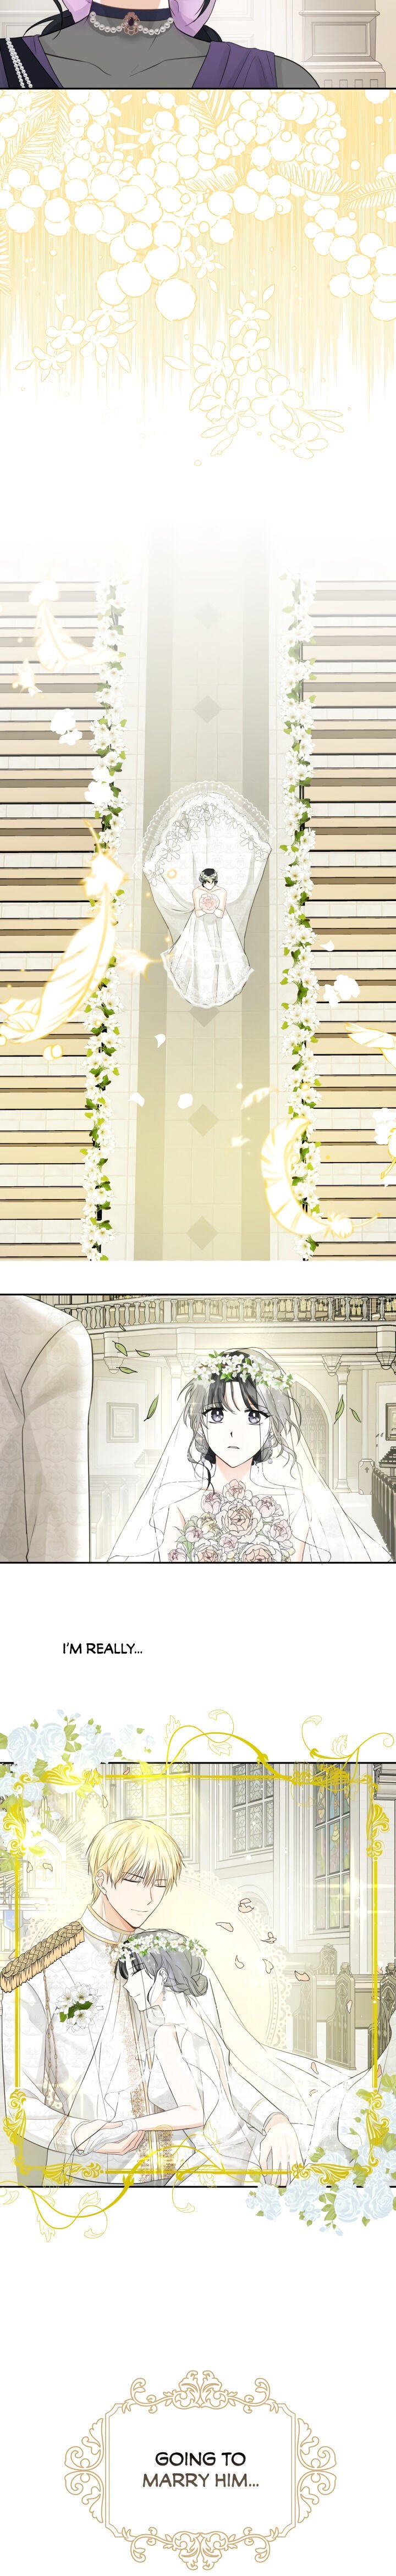 I Became the Wife of a Tragedy’s Main Lead chapter 14